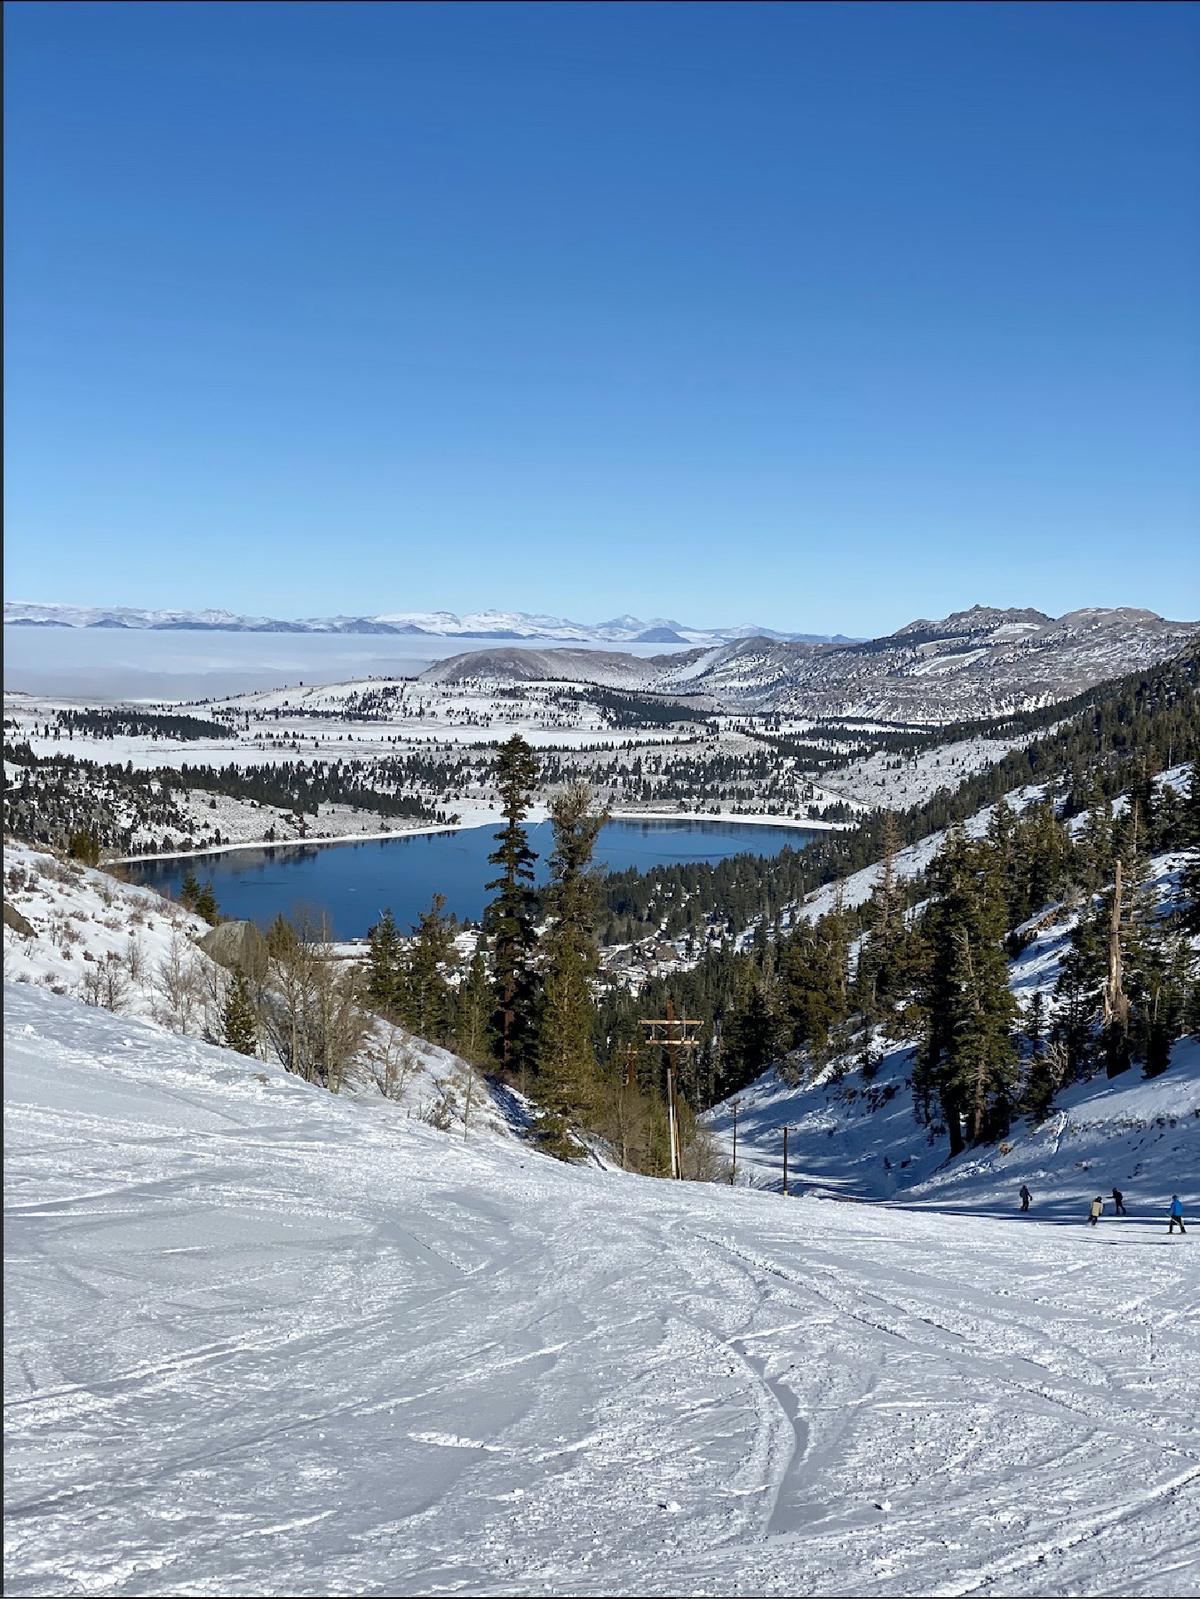 California’s Mammoth Lakes is a beautiful spot with many ways to spend a winter adventure. (Margot Black)